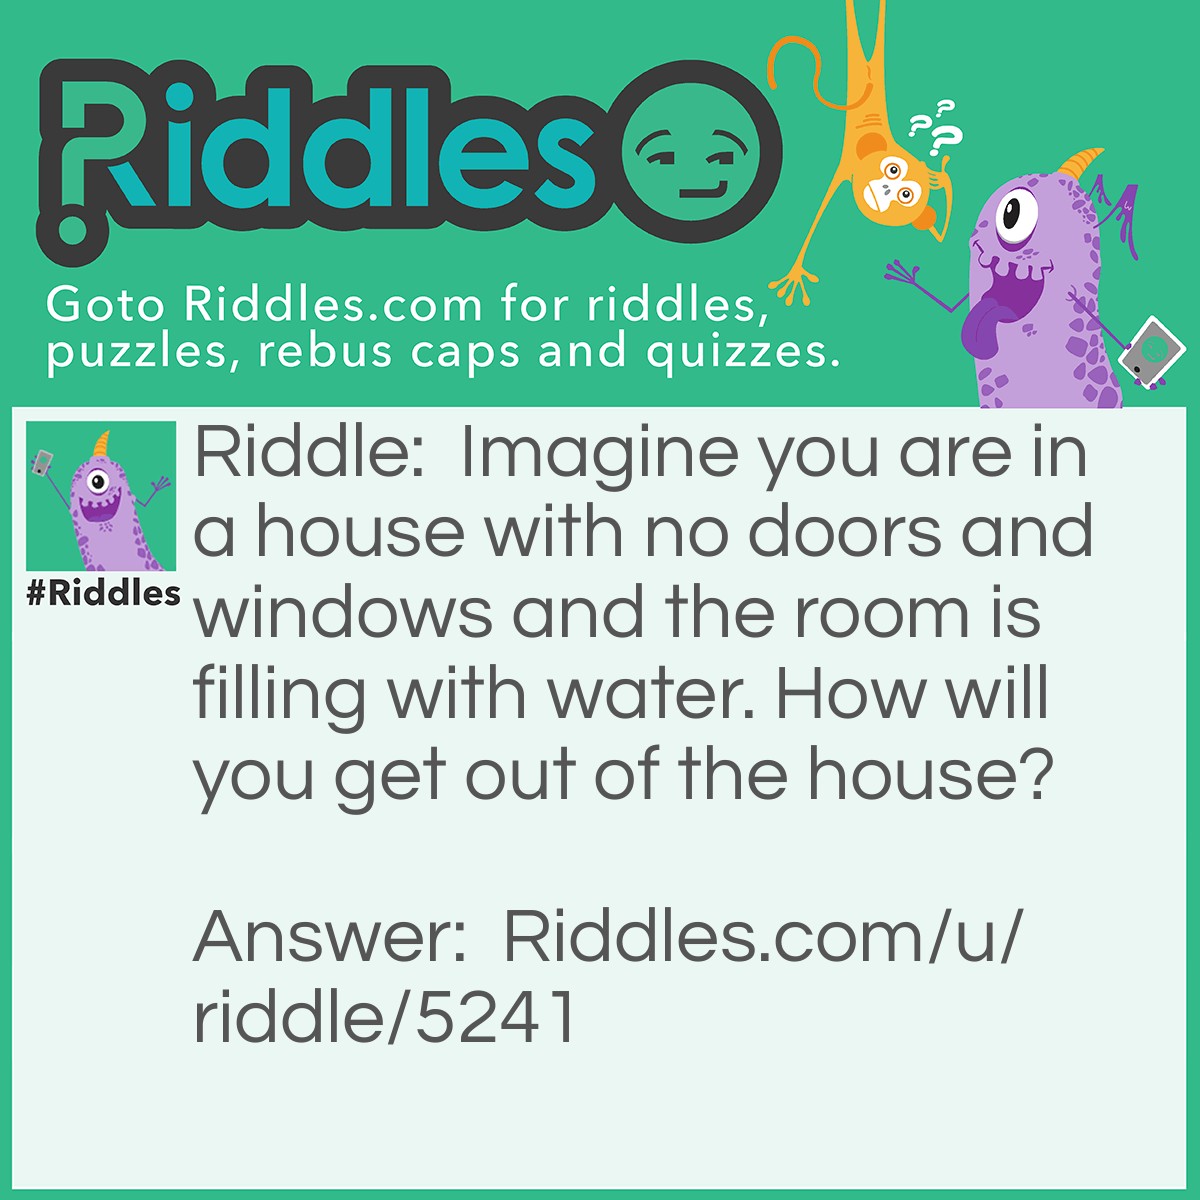 Riddle: Imagine you are in a house with no doors and windows and the room is filling with water. How will you get out of the house? Answer: Stop imagine